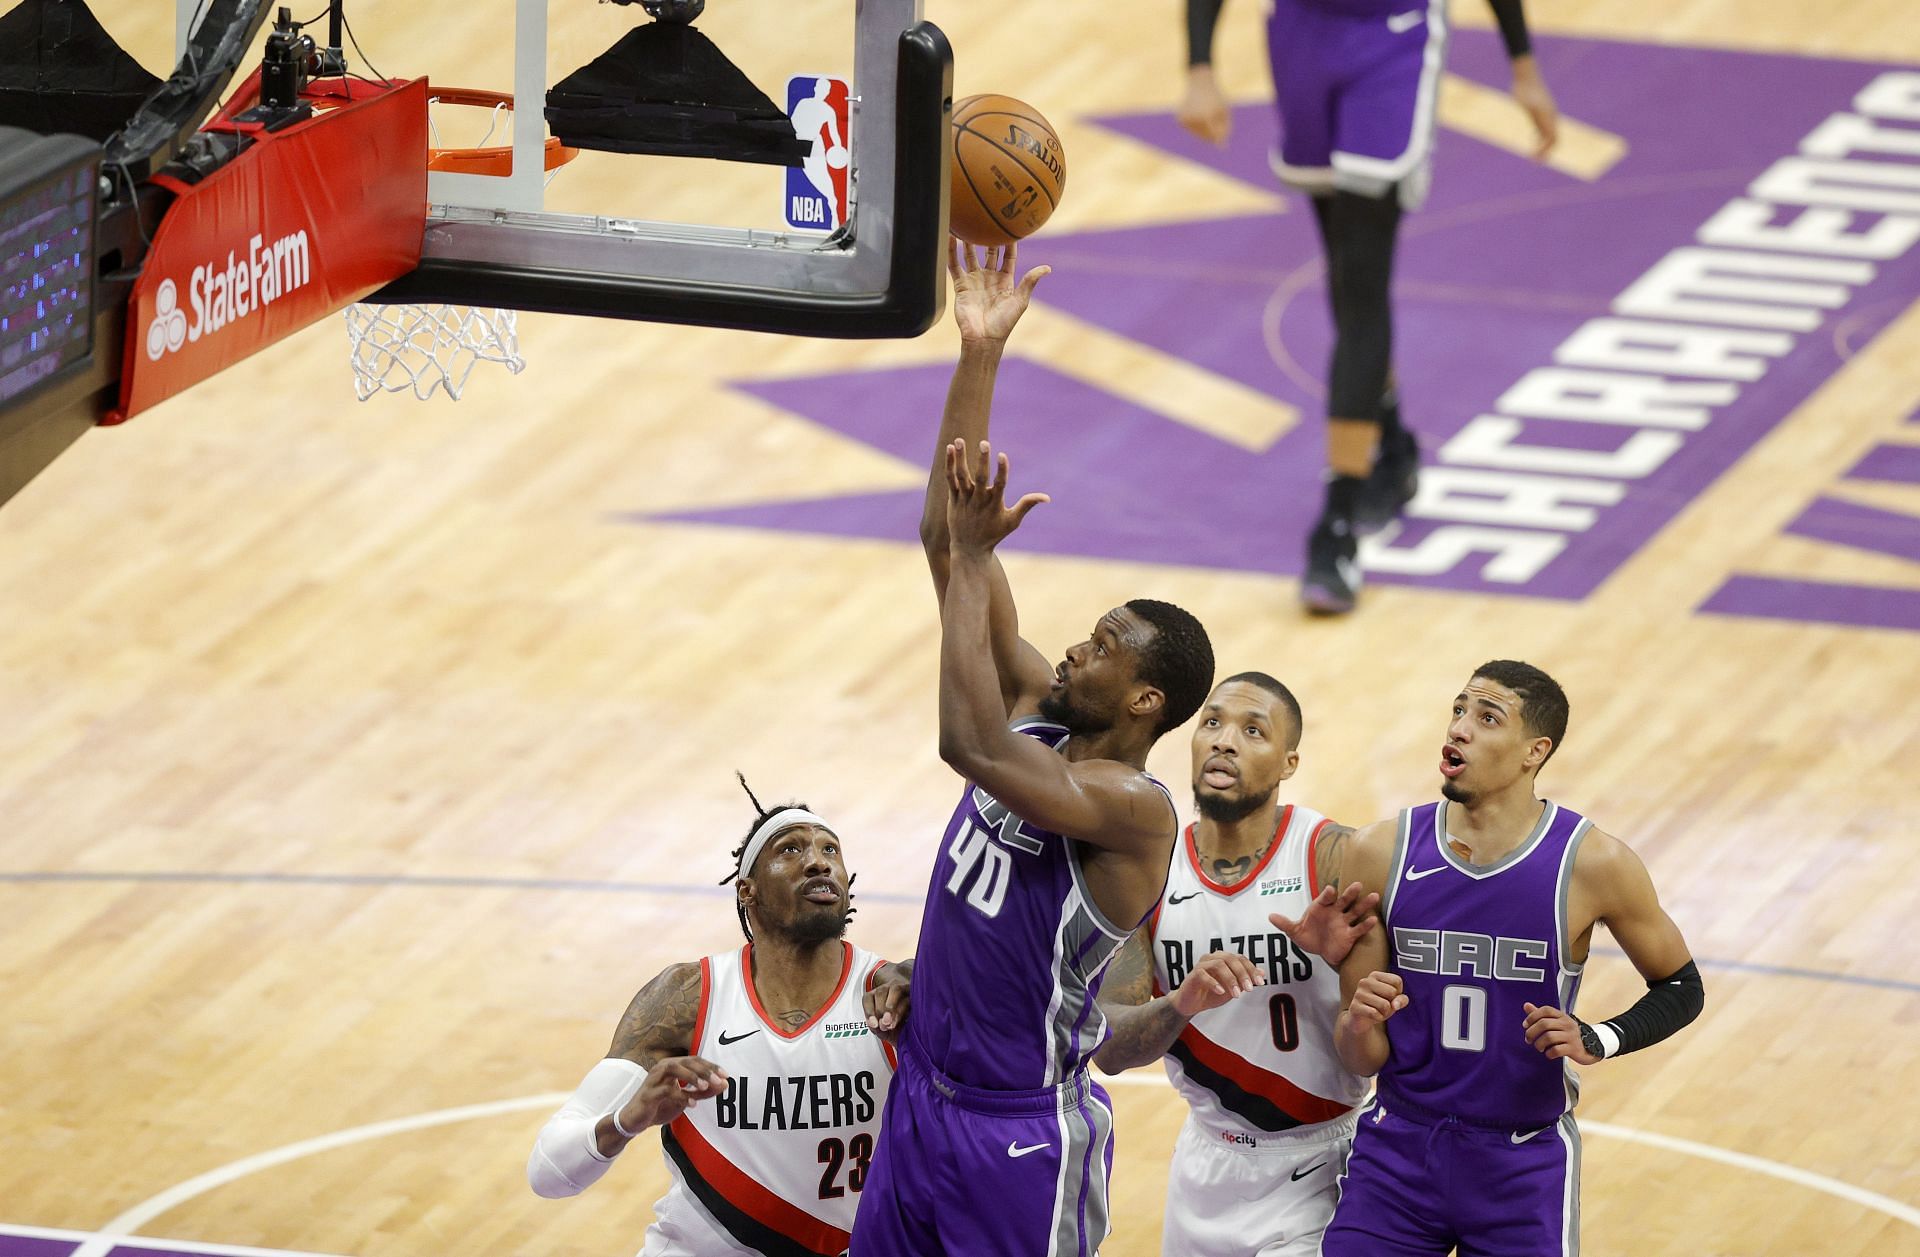 The Sacramento Kings face off against the Portland Trail Blazers in their season opener.